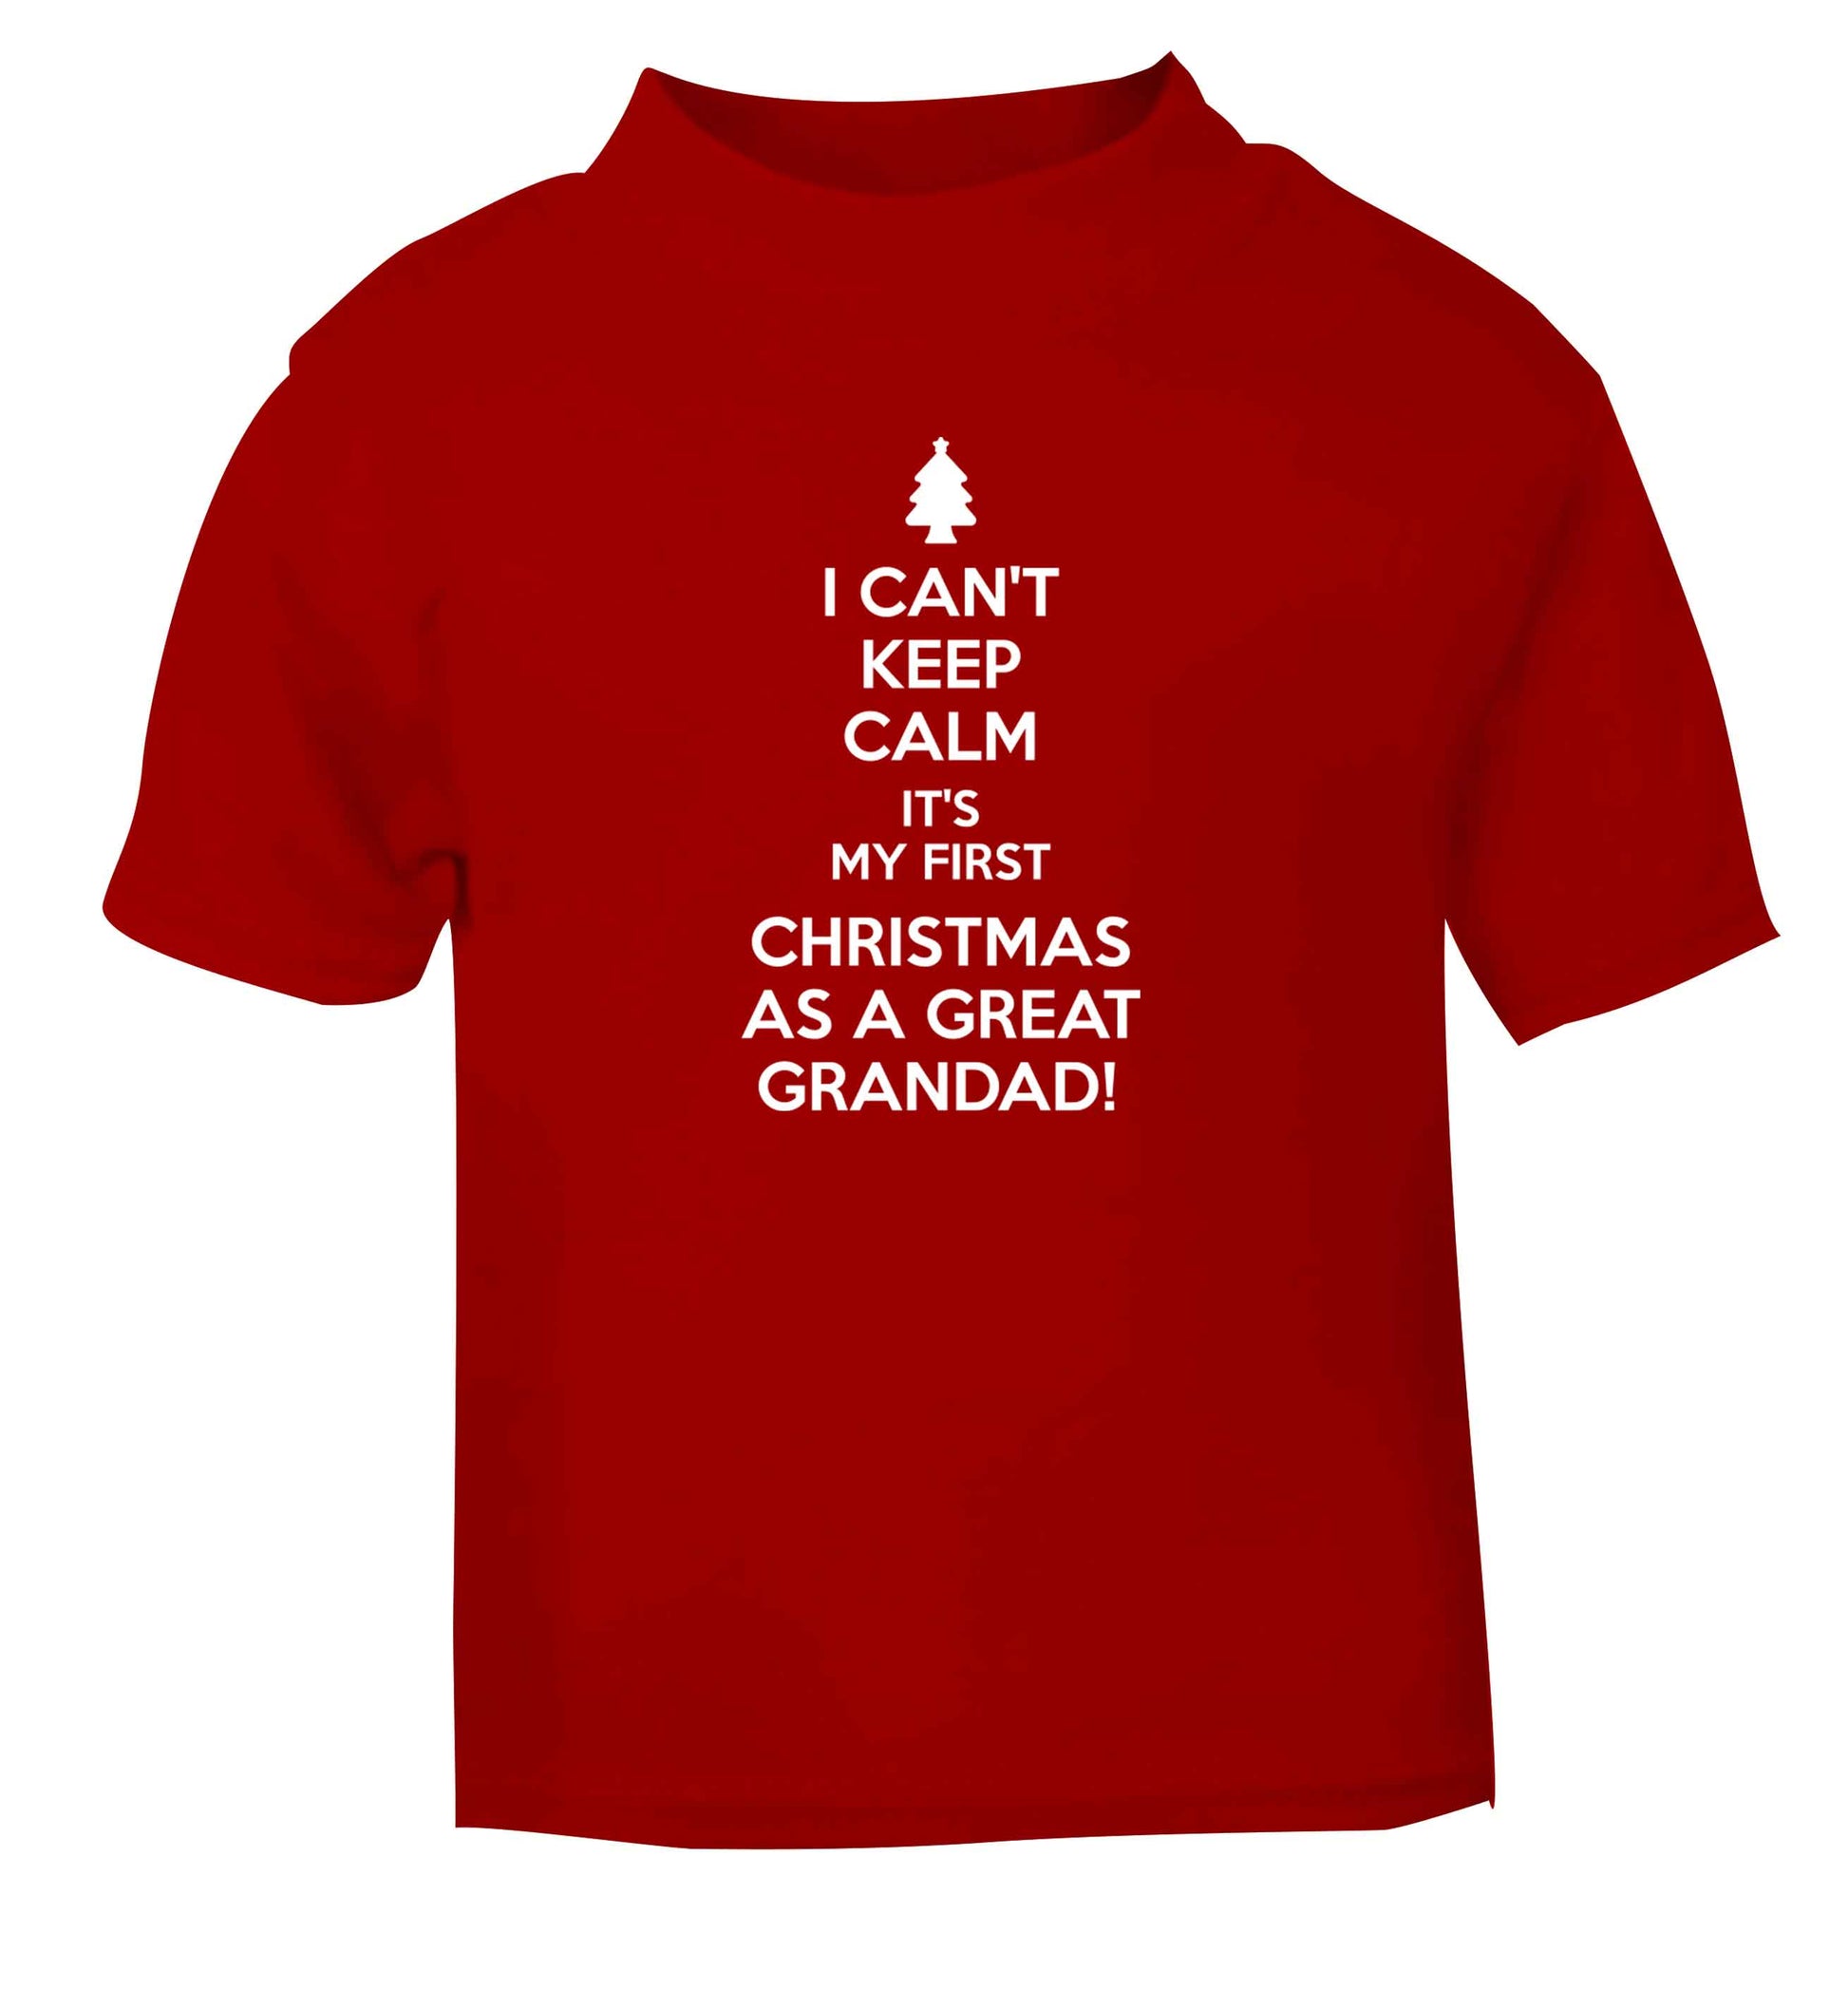 I can't keep calm it's my first Christmas as a great grandad! red Baby Toddler Tshirt 2 Years